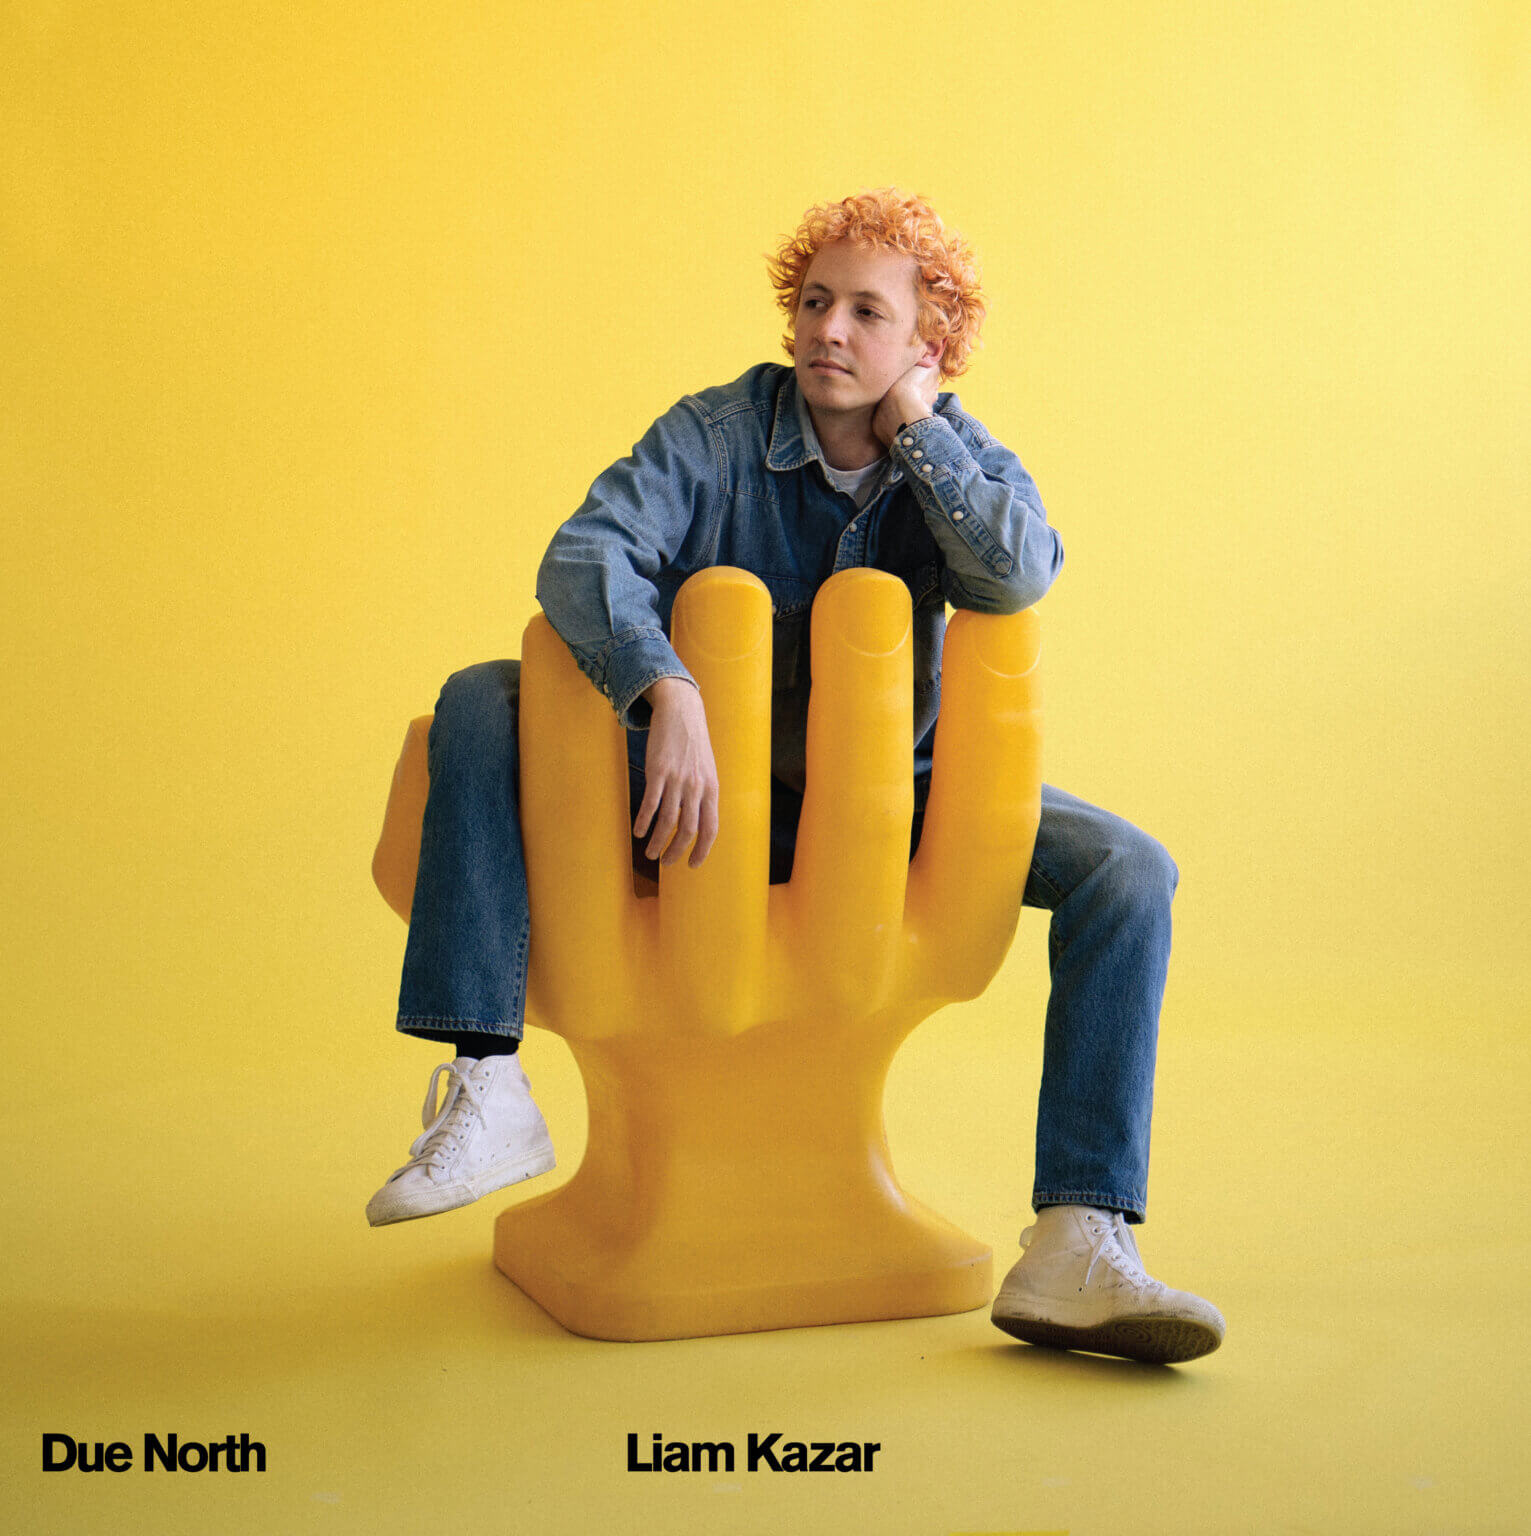 Chicago-raised musician, songwriter/chef Liam Kazar drops his his debut album, Due North on August 6, via Woodsist/Mare Records